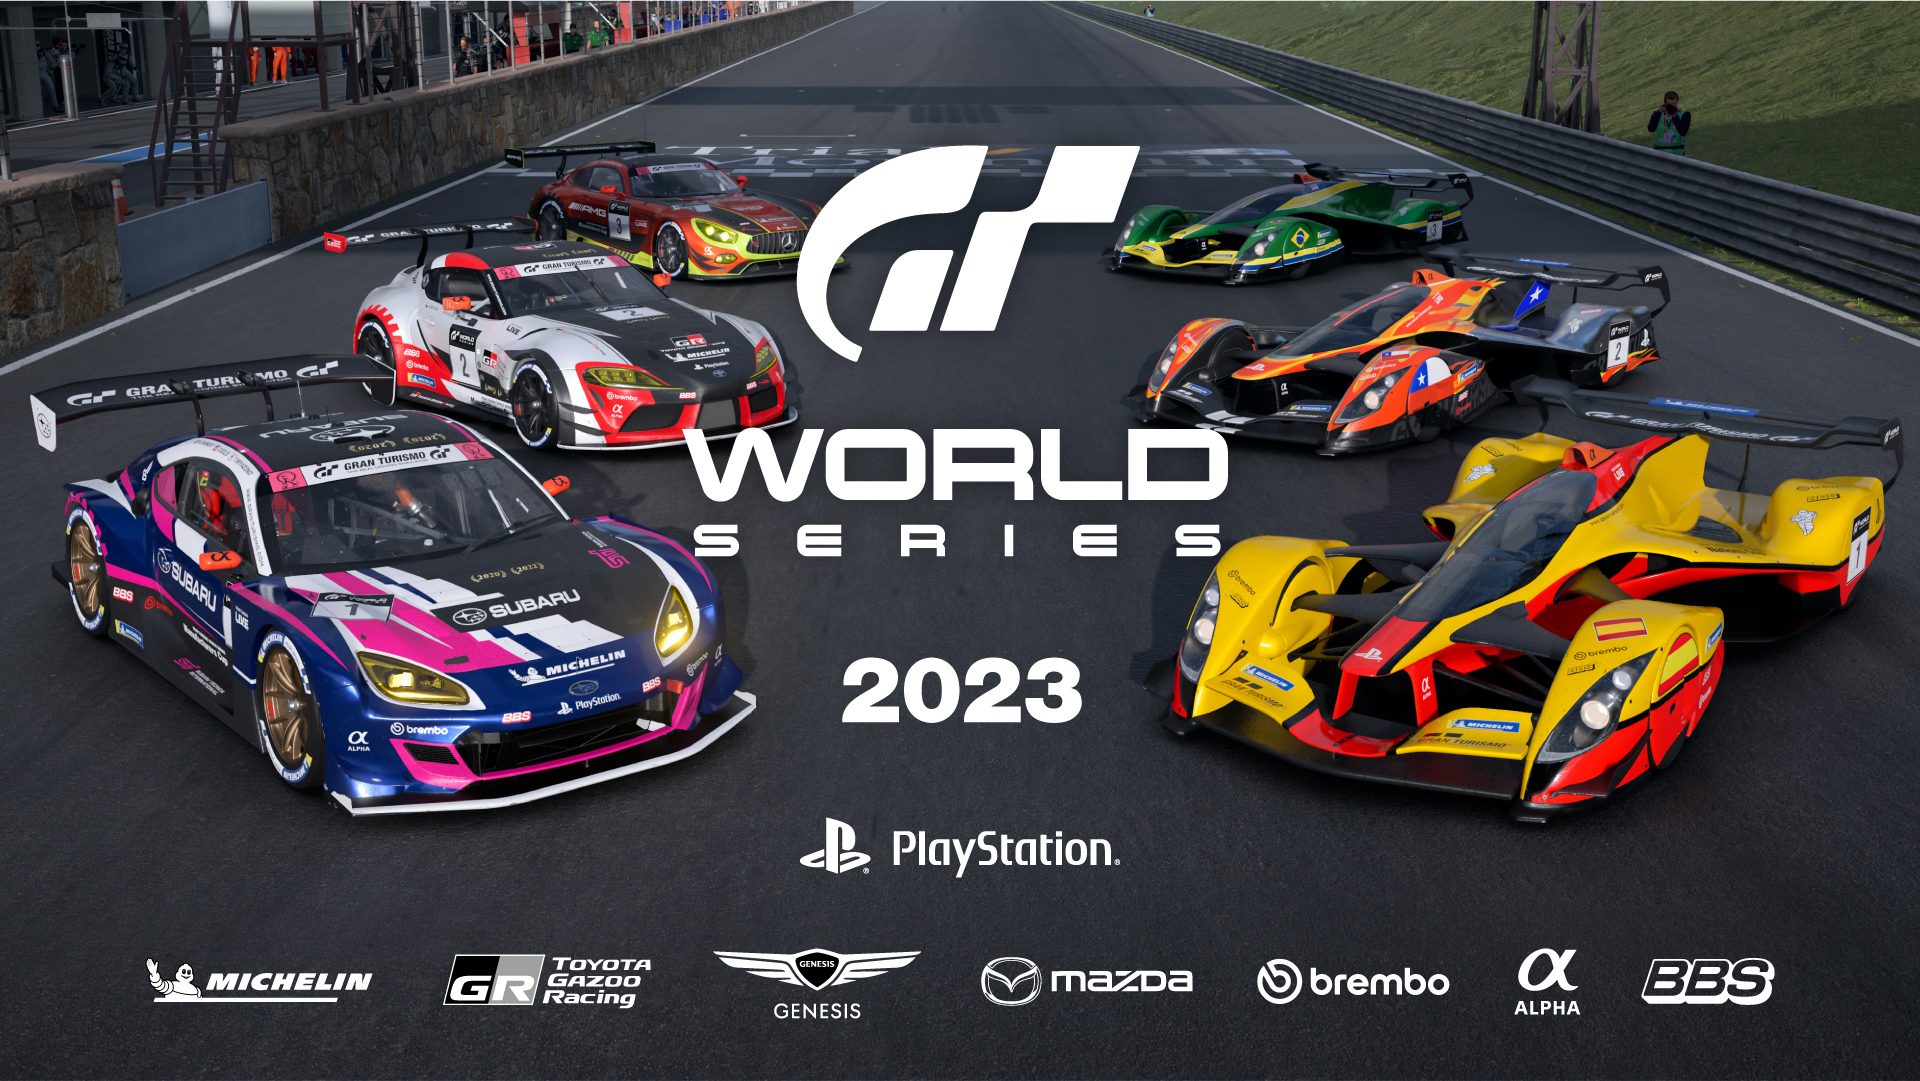 Toyota wins in Gran Turismo World Series Manufacturers Cup